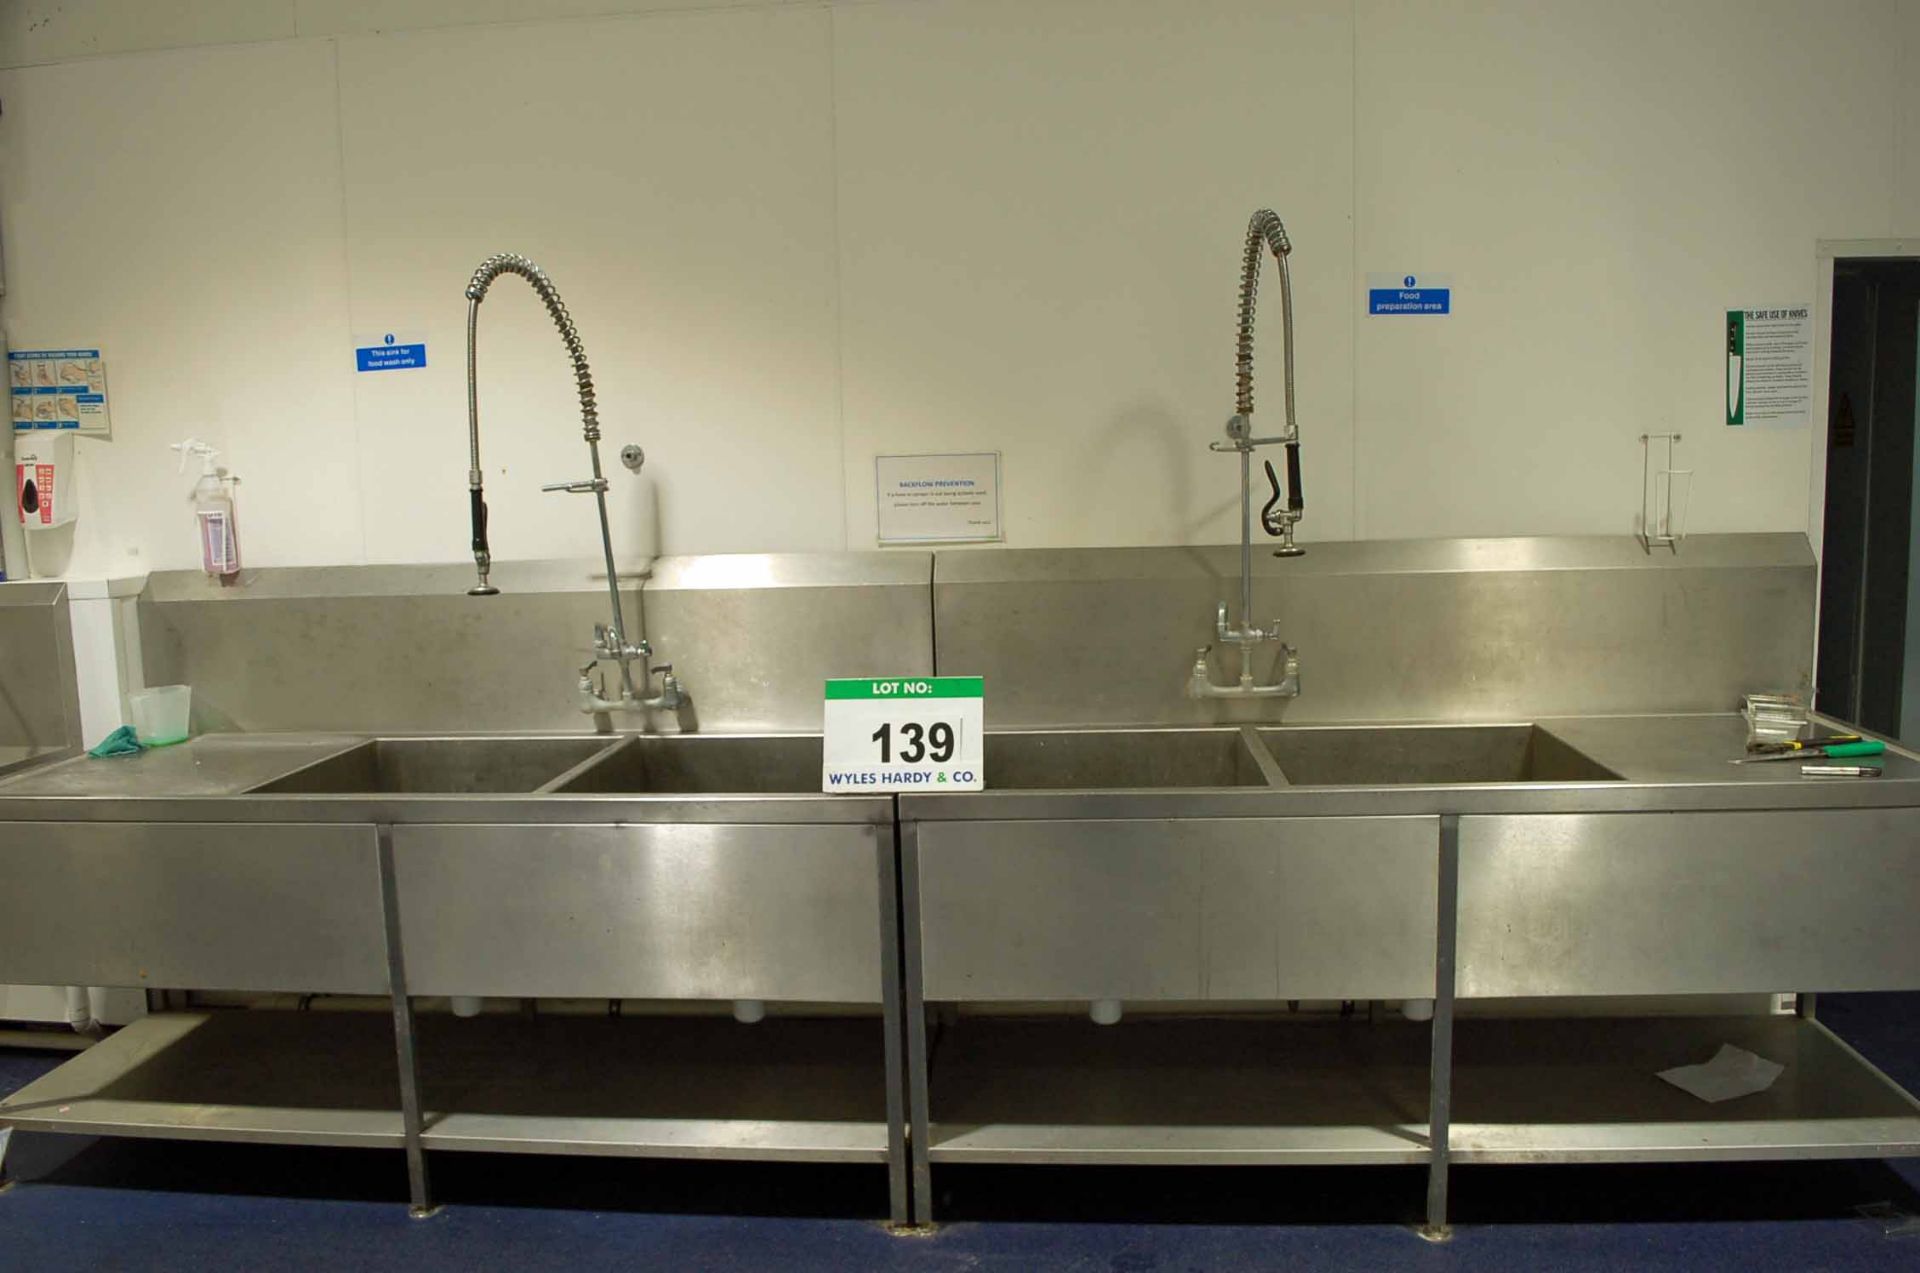 Two Stainless Steel Twin Pot Wash Sinks, each with Overhead Shower Lance (NOTE: Needs a Method